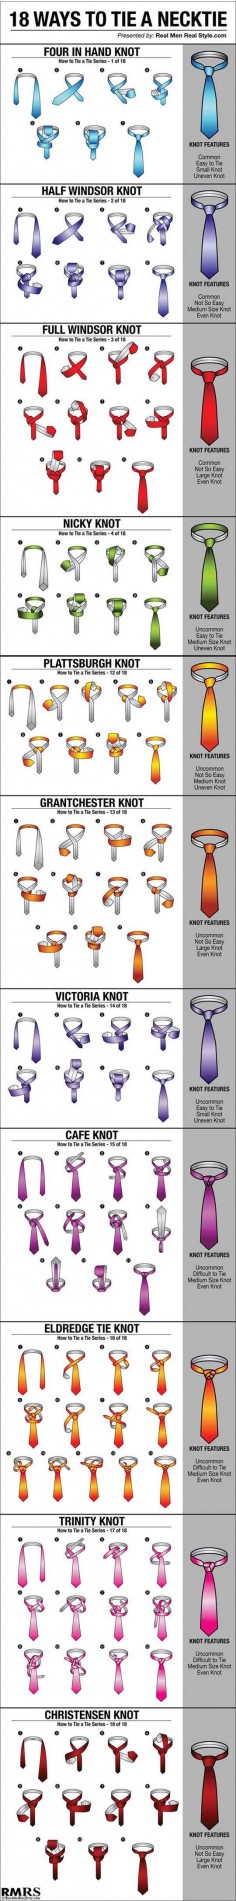 Here is a handy infographic that shows 18 ways to tie a necktie.